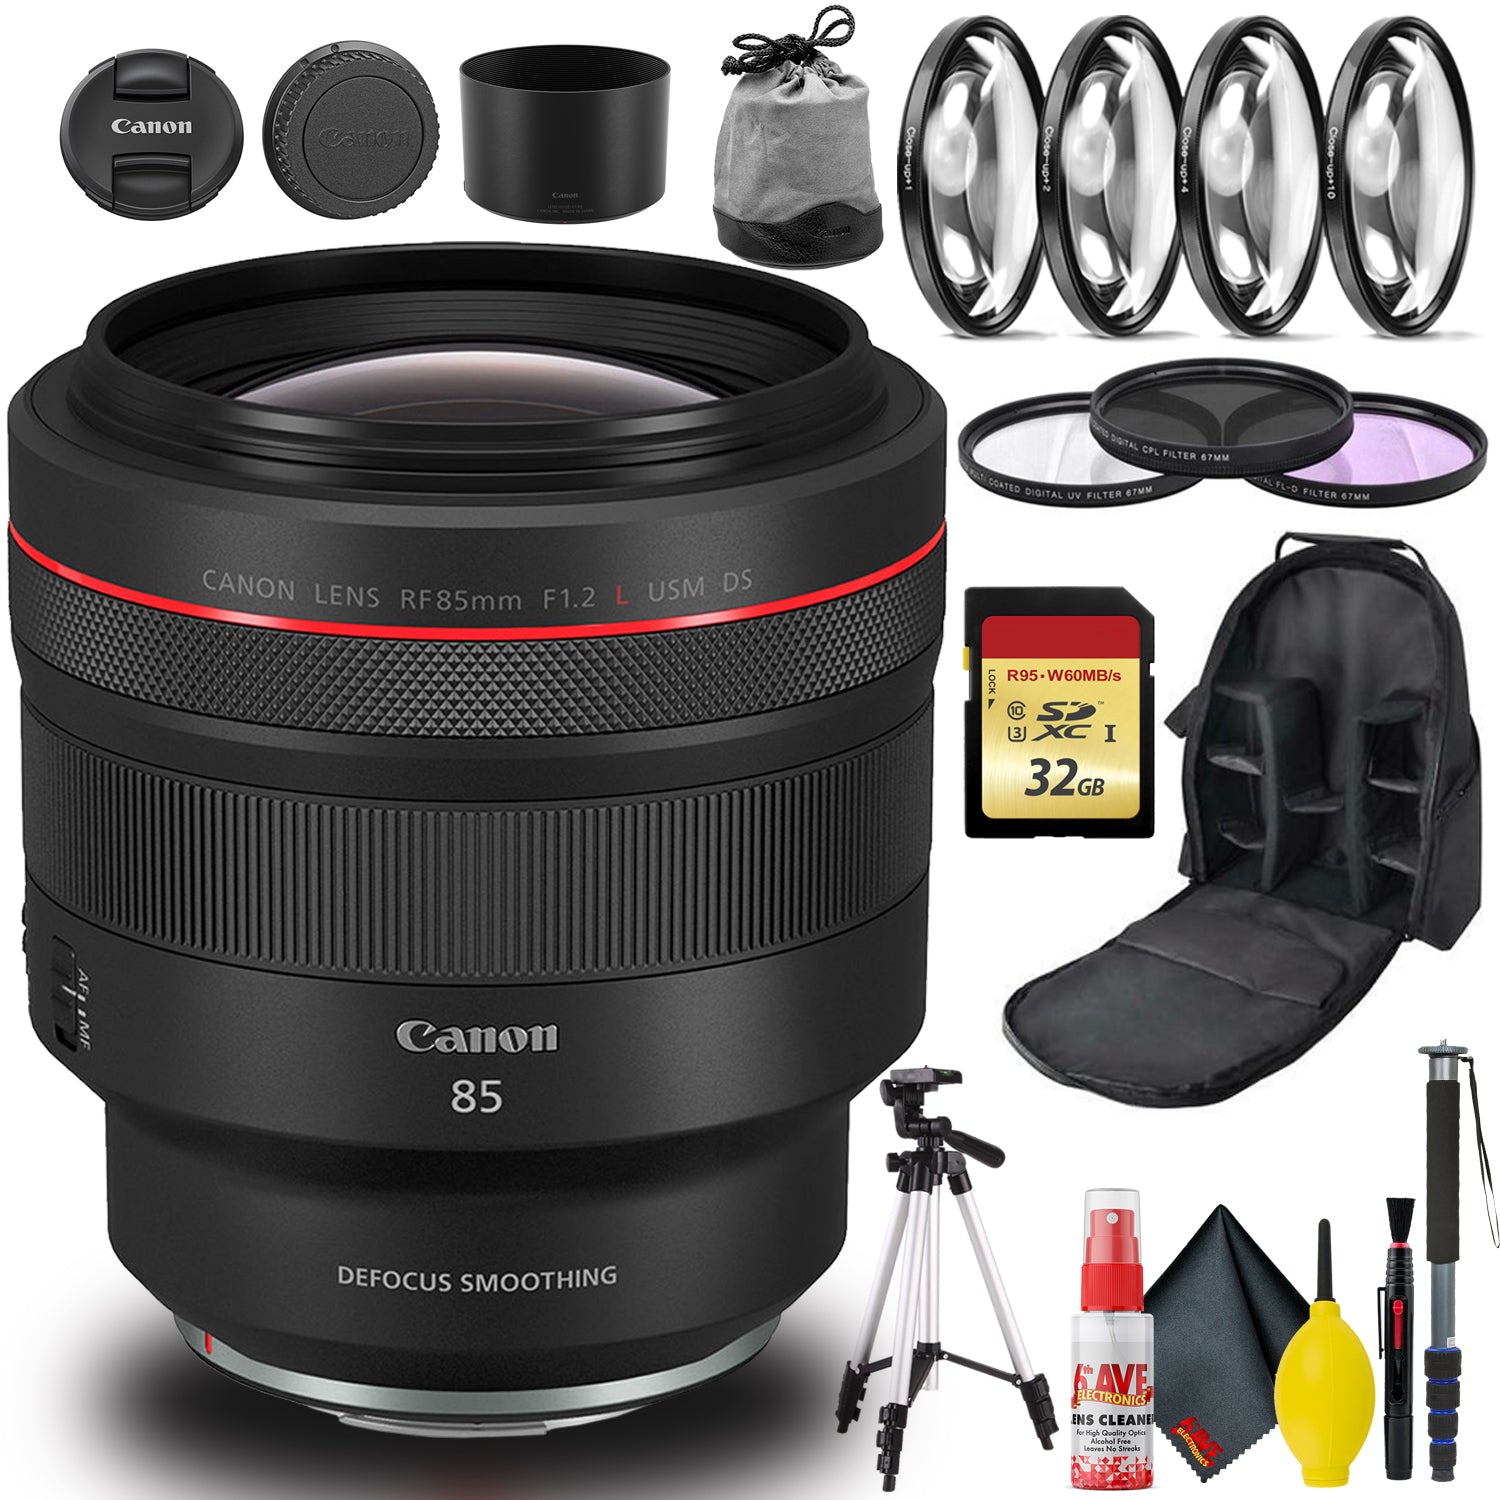 Canon RF 85mm f/1.2L USM DS Lens Bundle with 32GB Memory, Tripod, Bag, and More